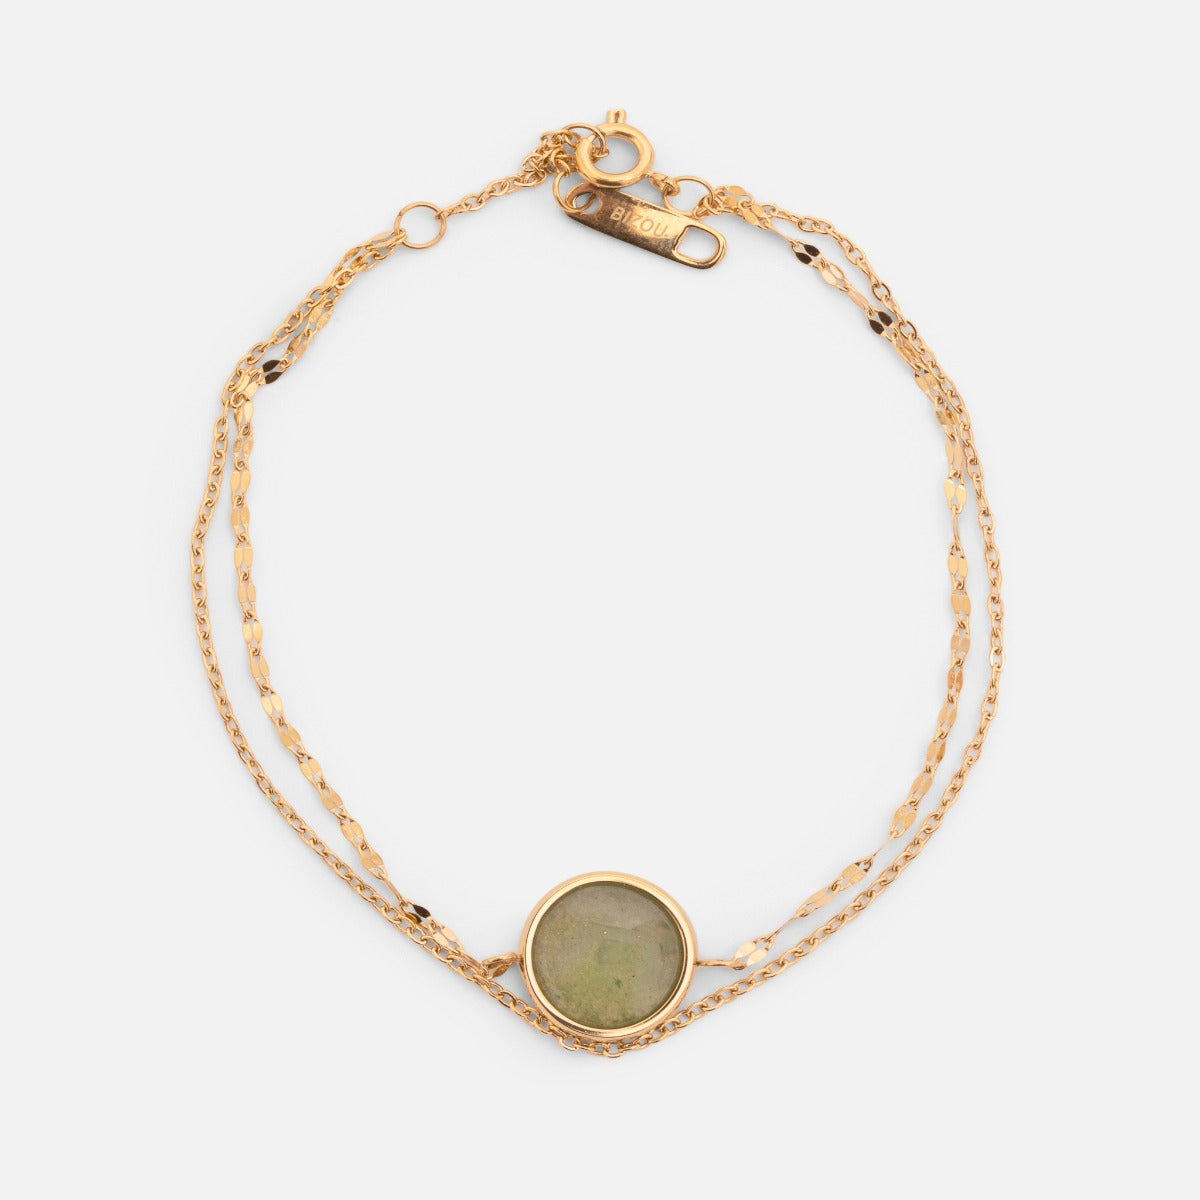 Golden stainless steel bracelet with double chain and green round charm